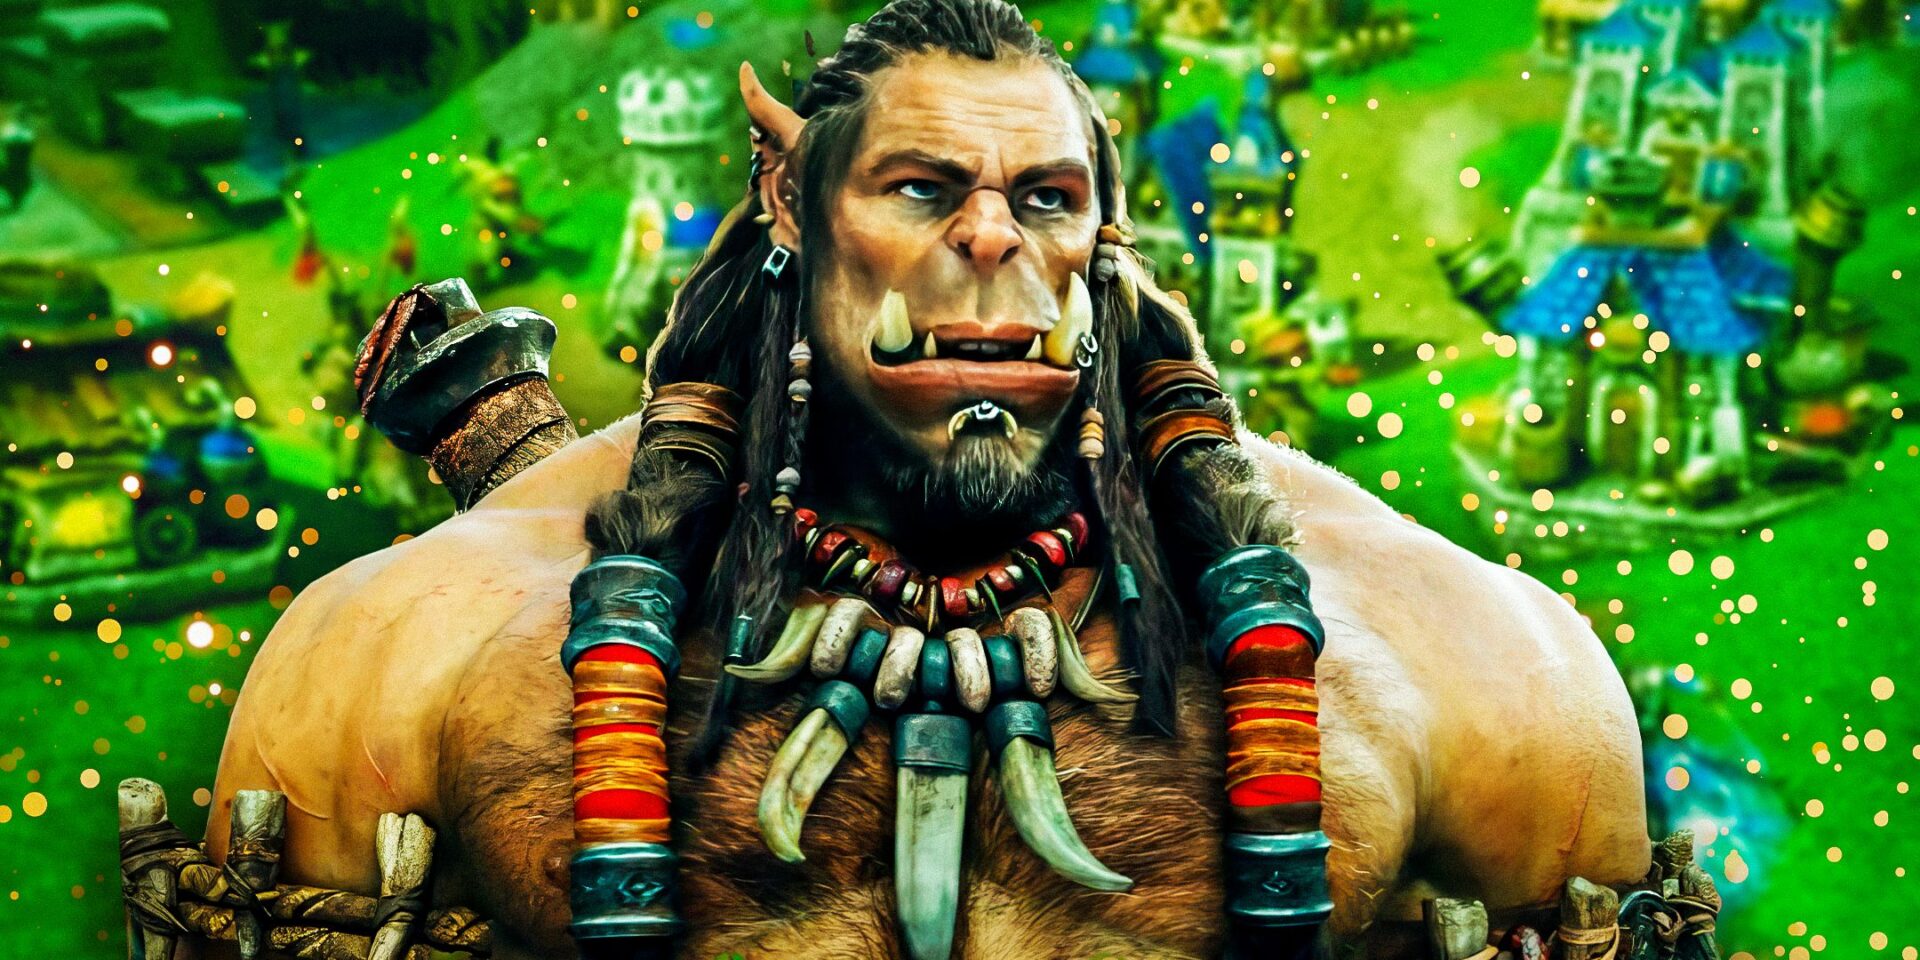 9 Biggest Changes Warcraft Makes To The Video Games